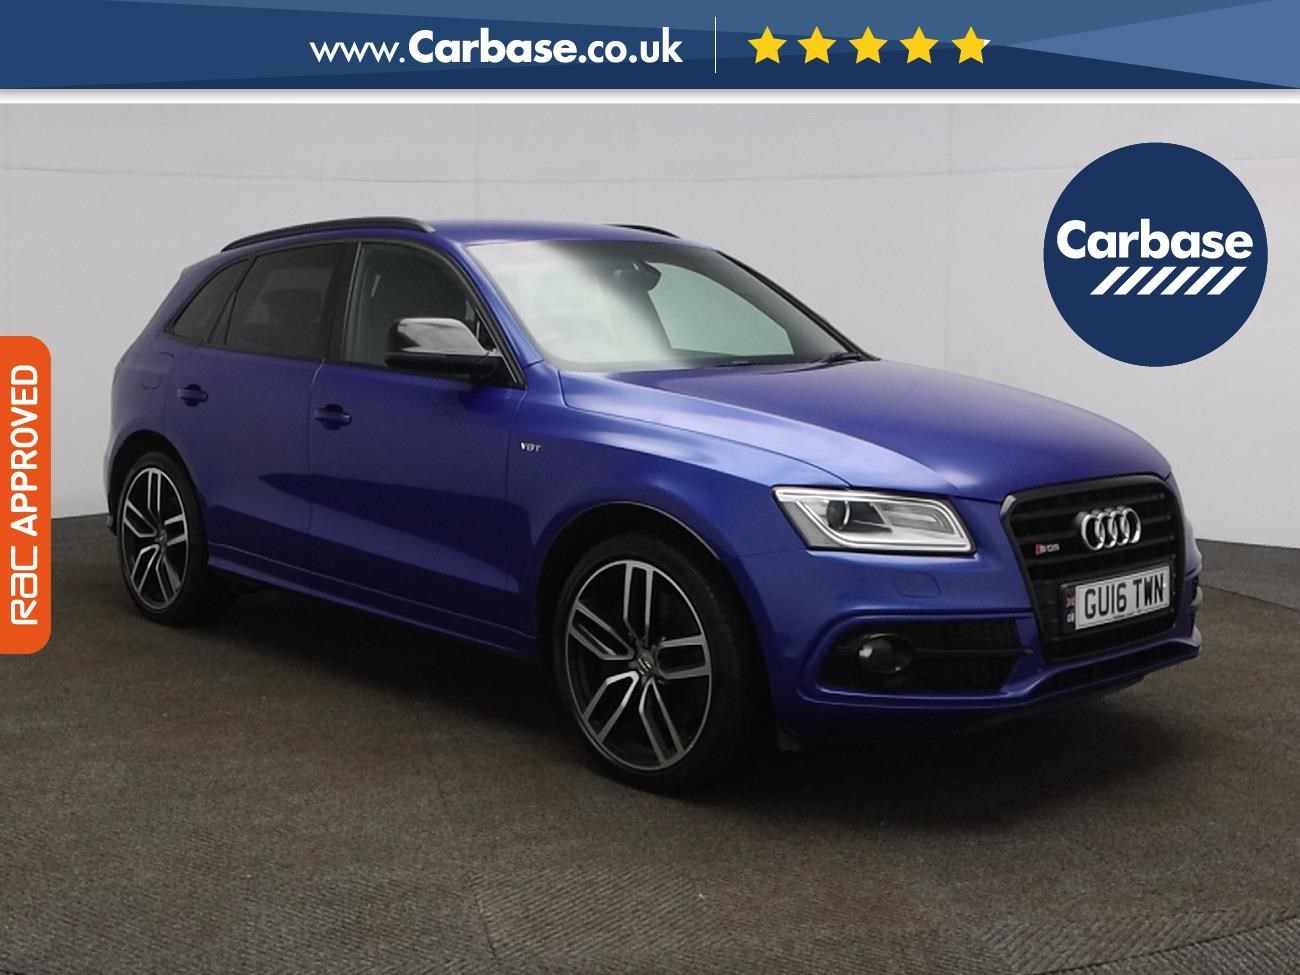 Used Audi Q5 Cars for Sale Bristol and Audi Q5 Finance Deals - Carbase